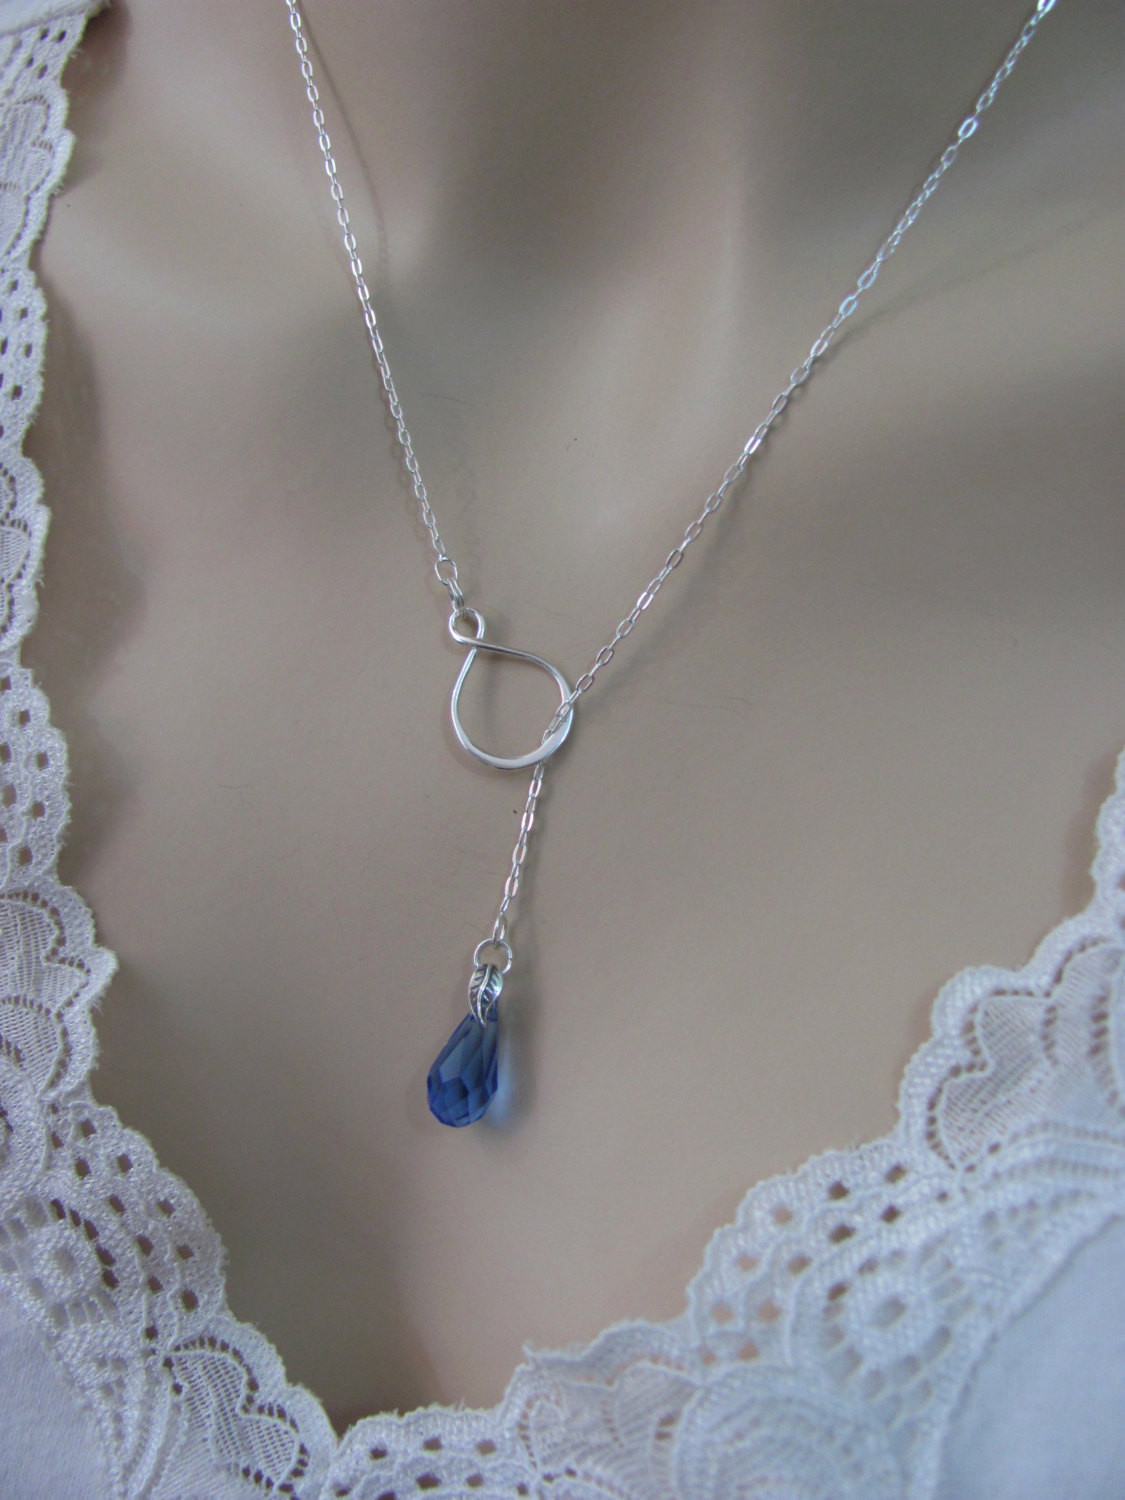 Infinity Lariat Necklace
 Sapphire Infinity Lariat Necklace in by LindasJewelryShopLLC